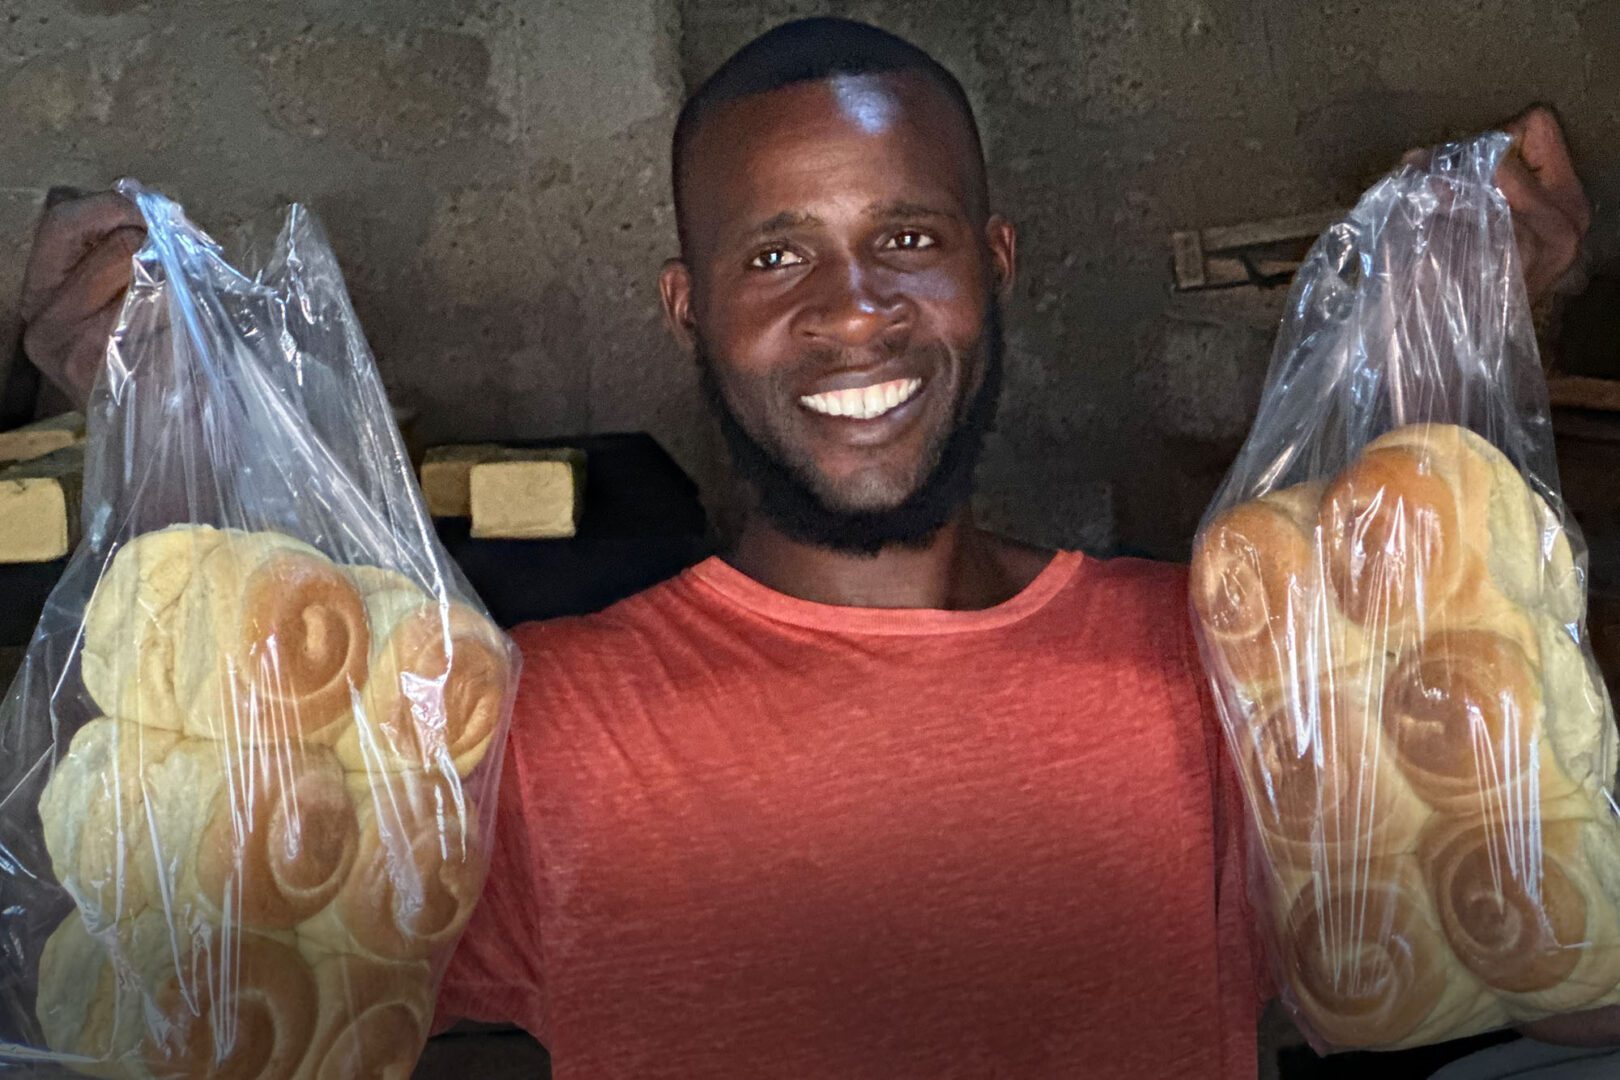 African man from Sierra Leone holds up baked breads he made while smiling.